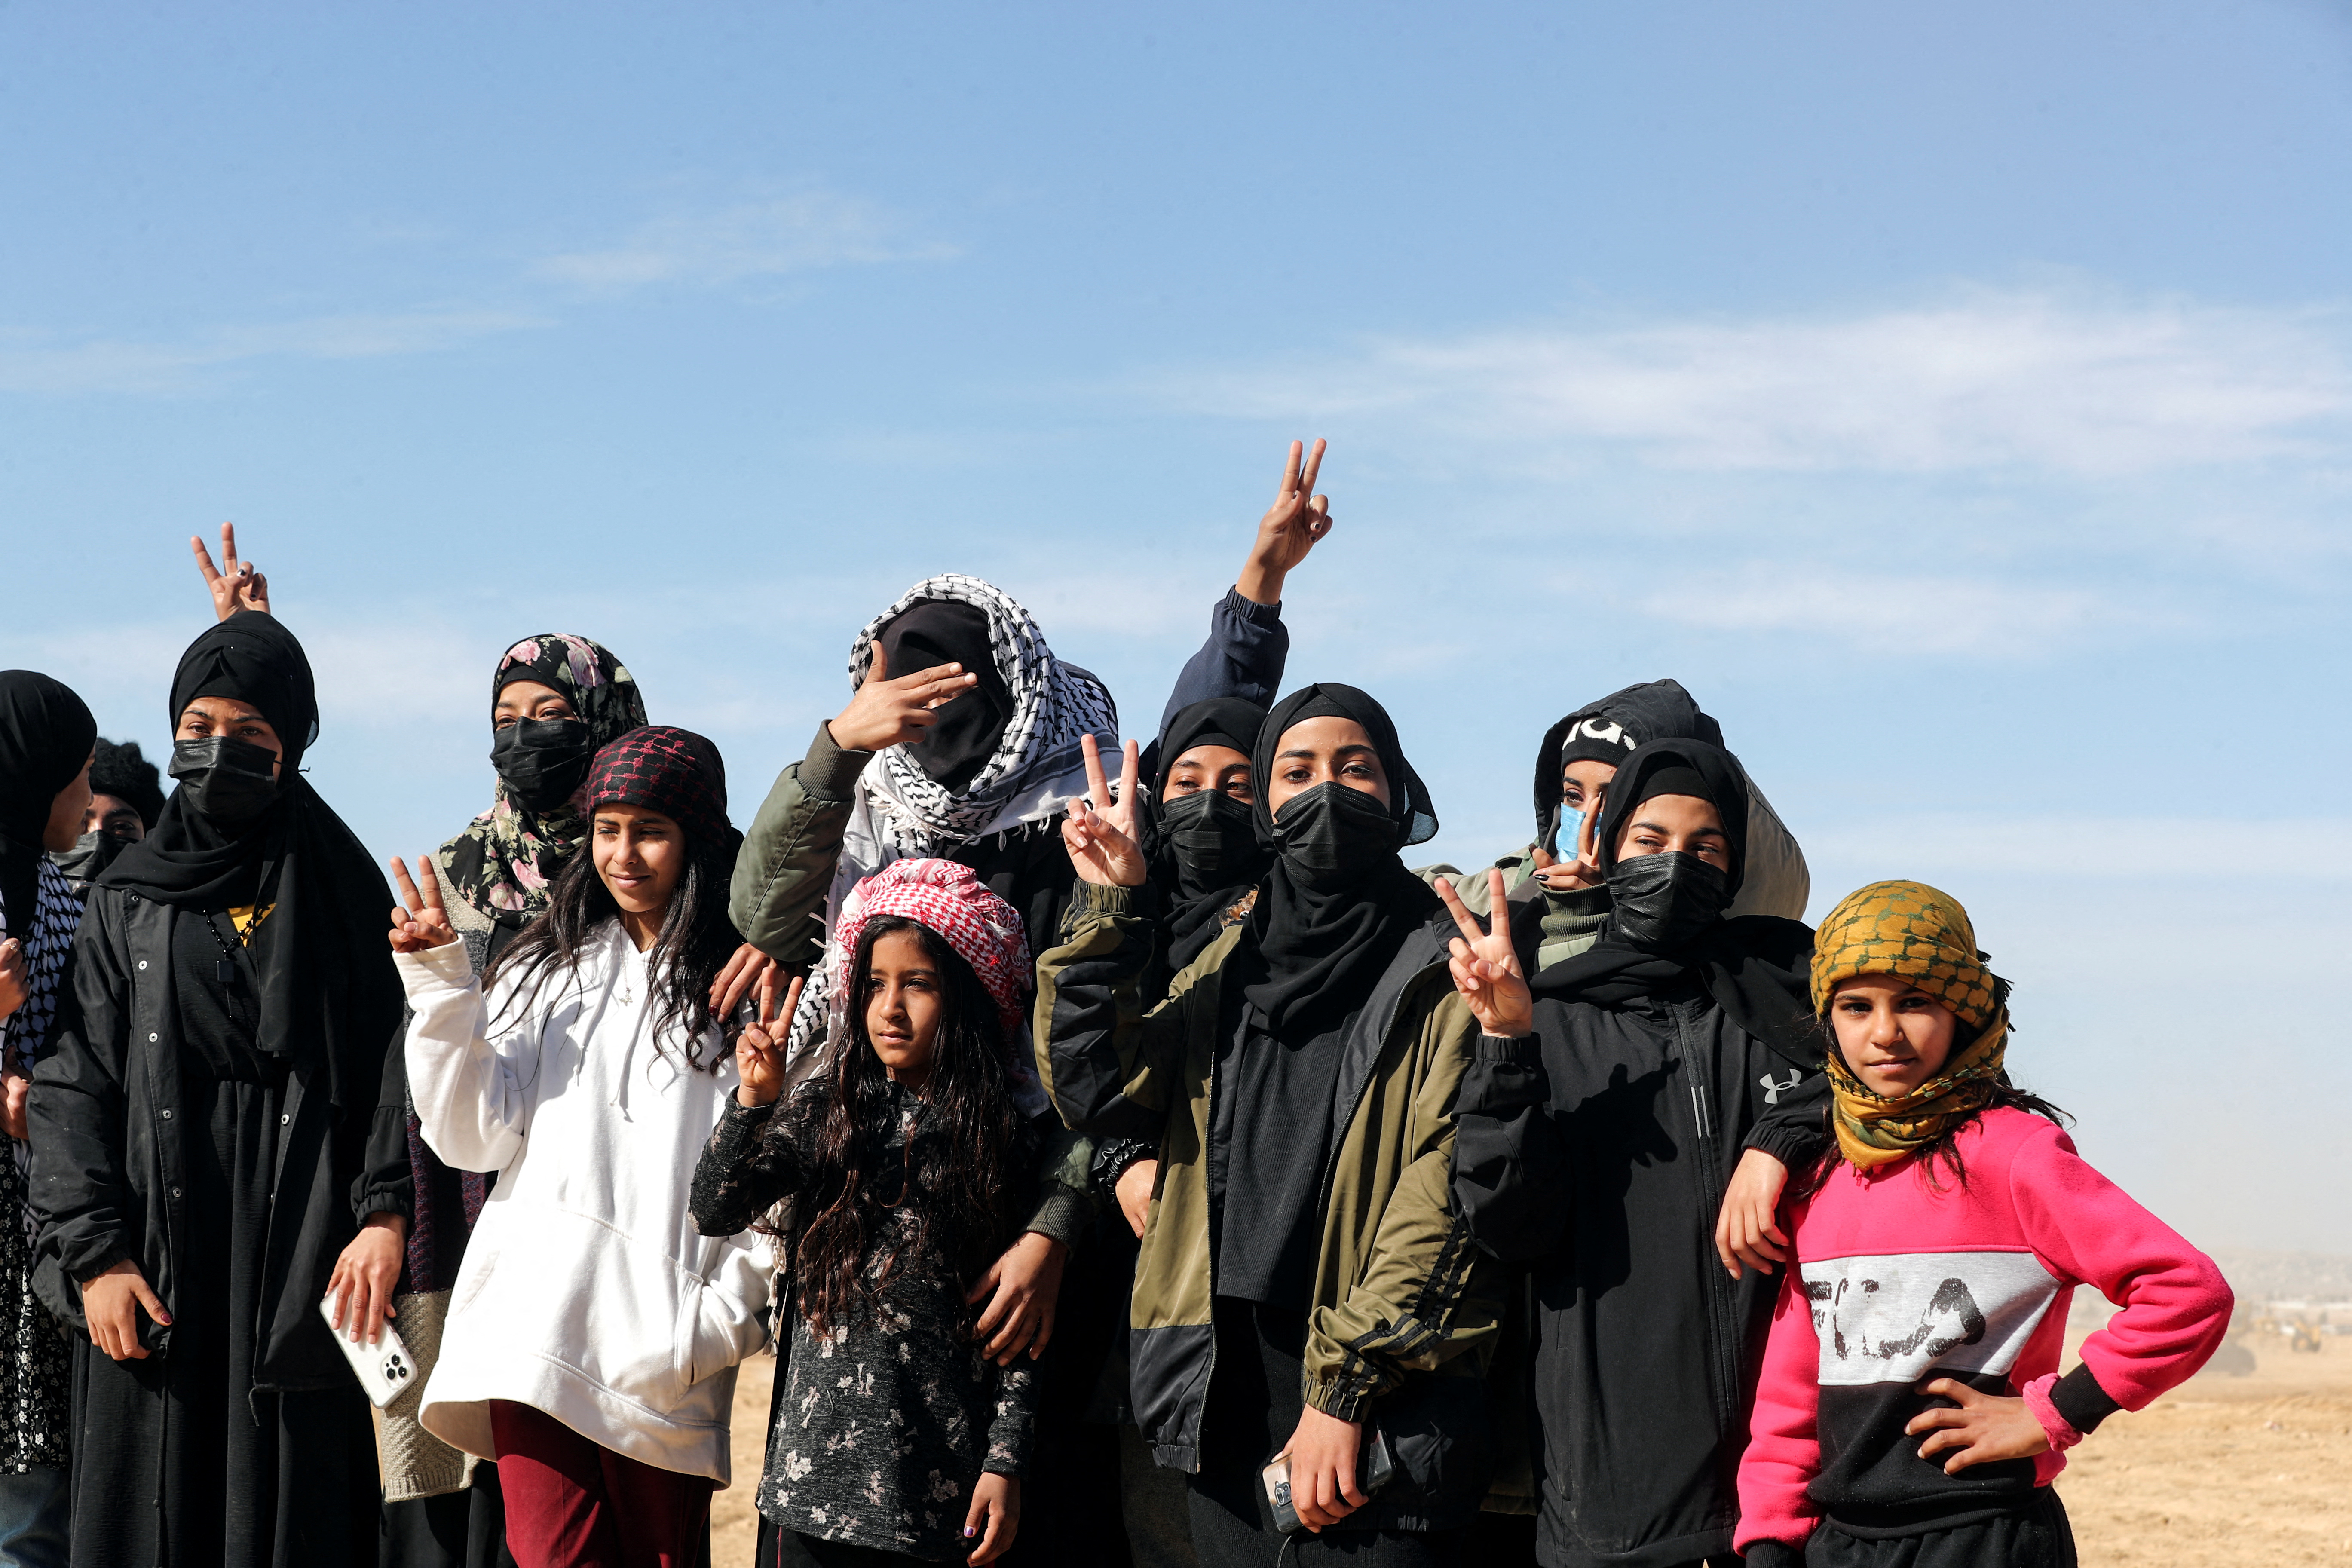 Bedouin women and girls gesture during a protest against forestation at the Negev desert village of Sawe al-Atrash, southern Israel